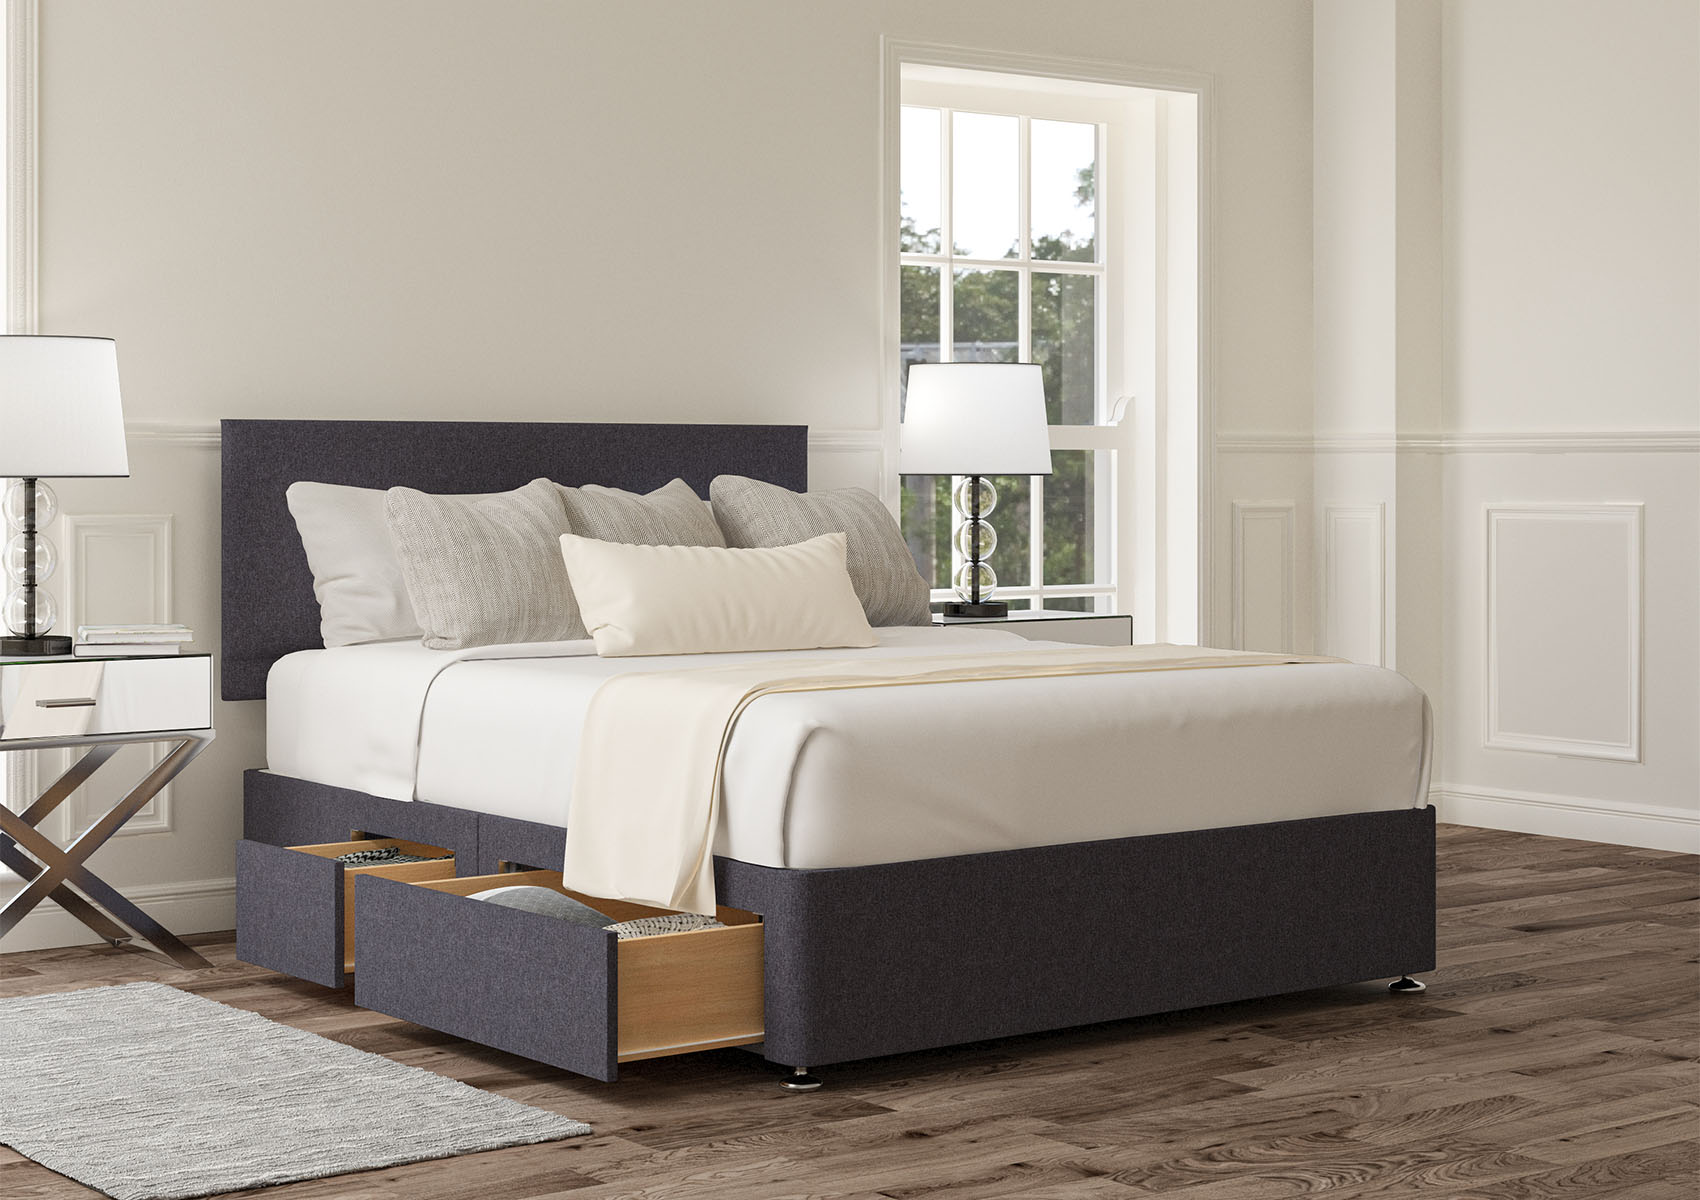 View Henley Verona Silver Upholstered Double Divan Bed Time4Sleep information